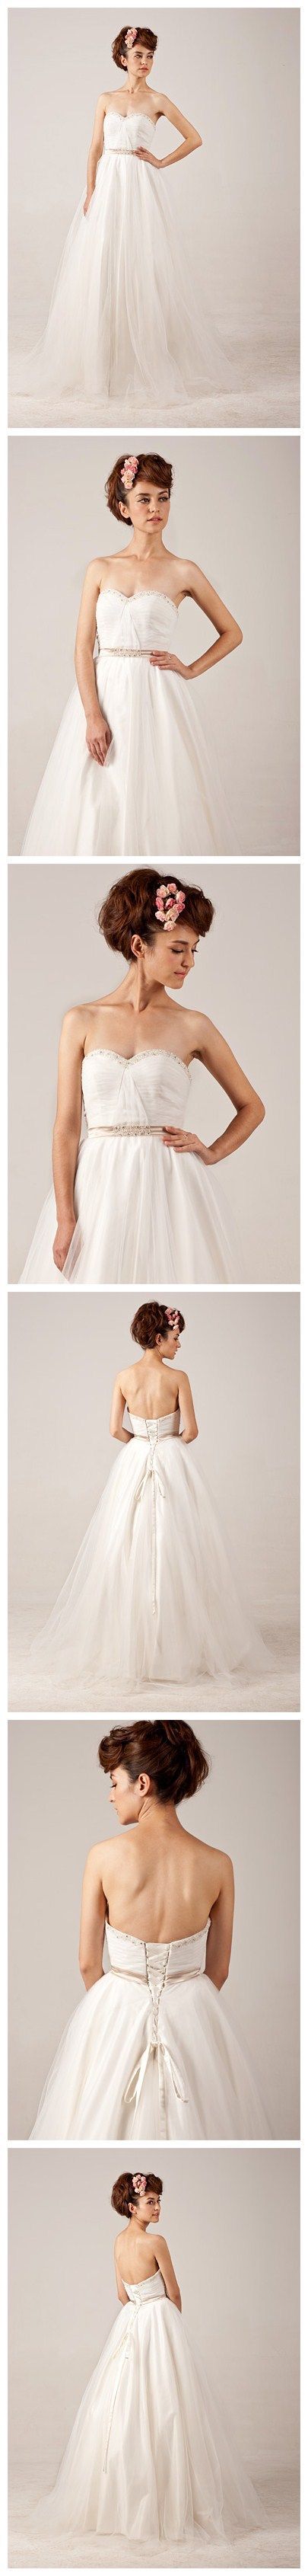 Lace-up Ball Grown Beading Strapless Tulle Wedding Dress. LOVE THIS